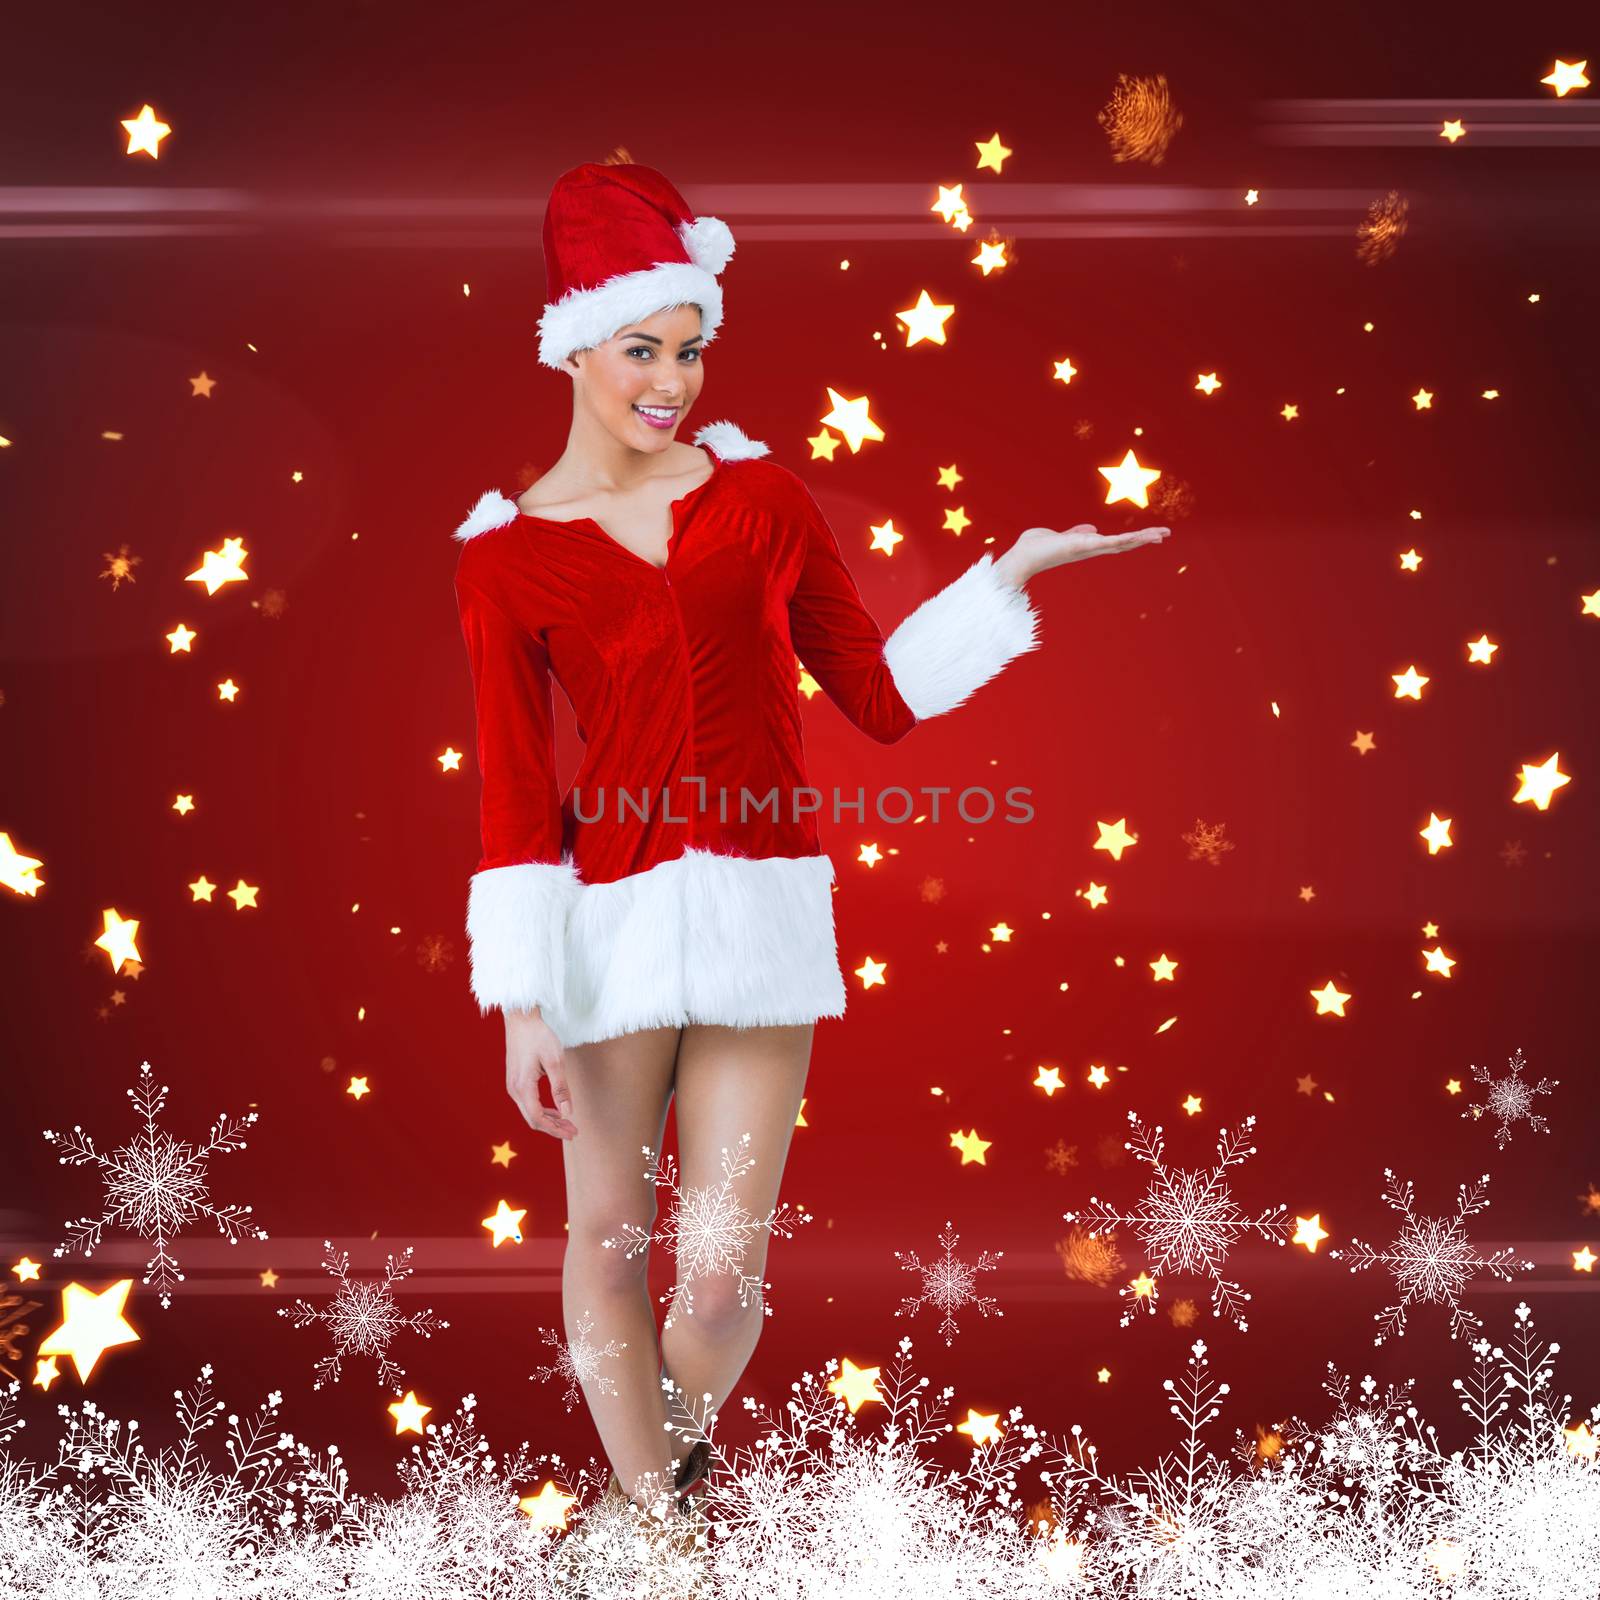 Pretty santa girl presenting with hand against bright star pattern on red